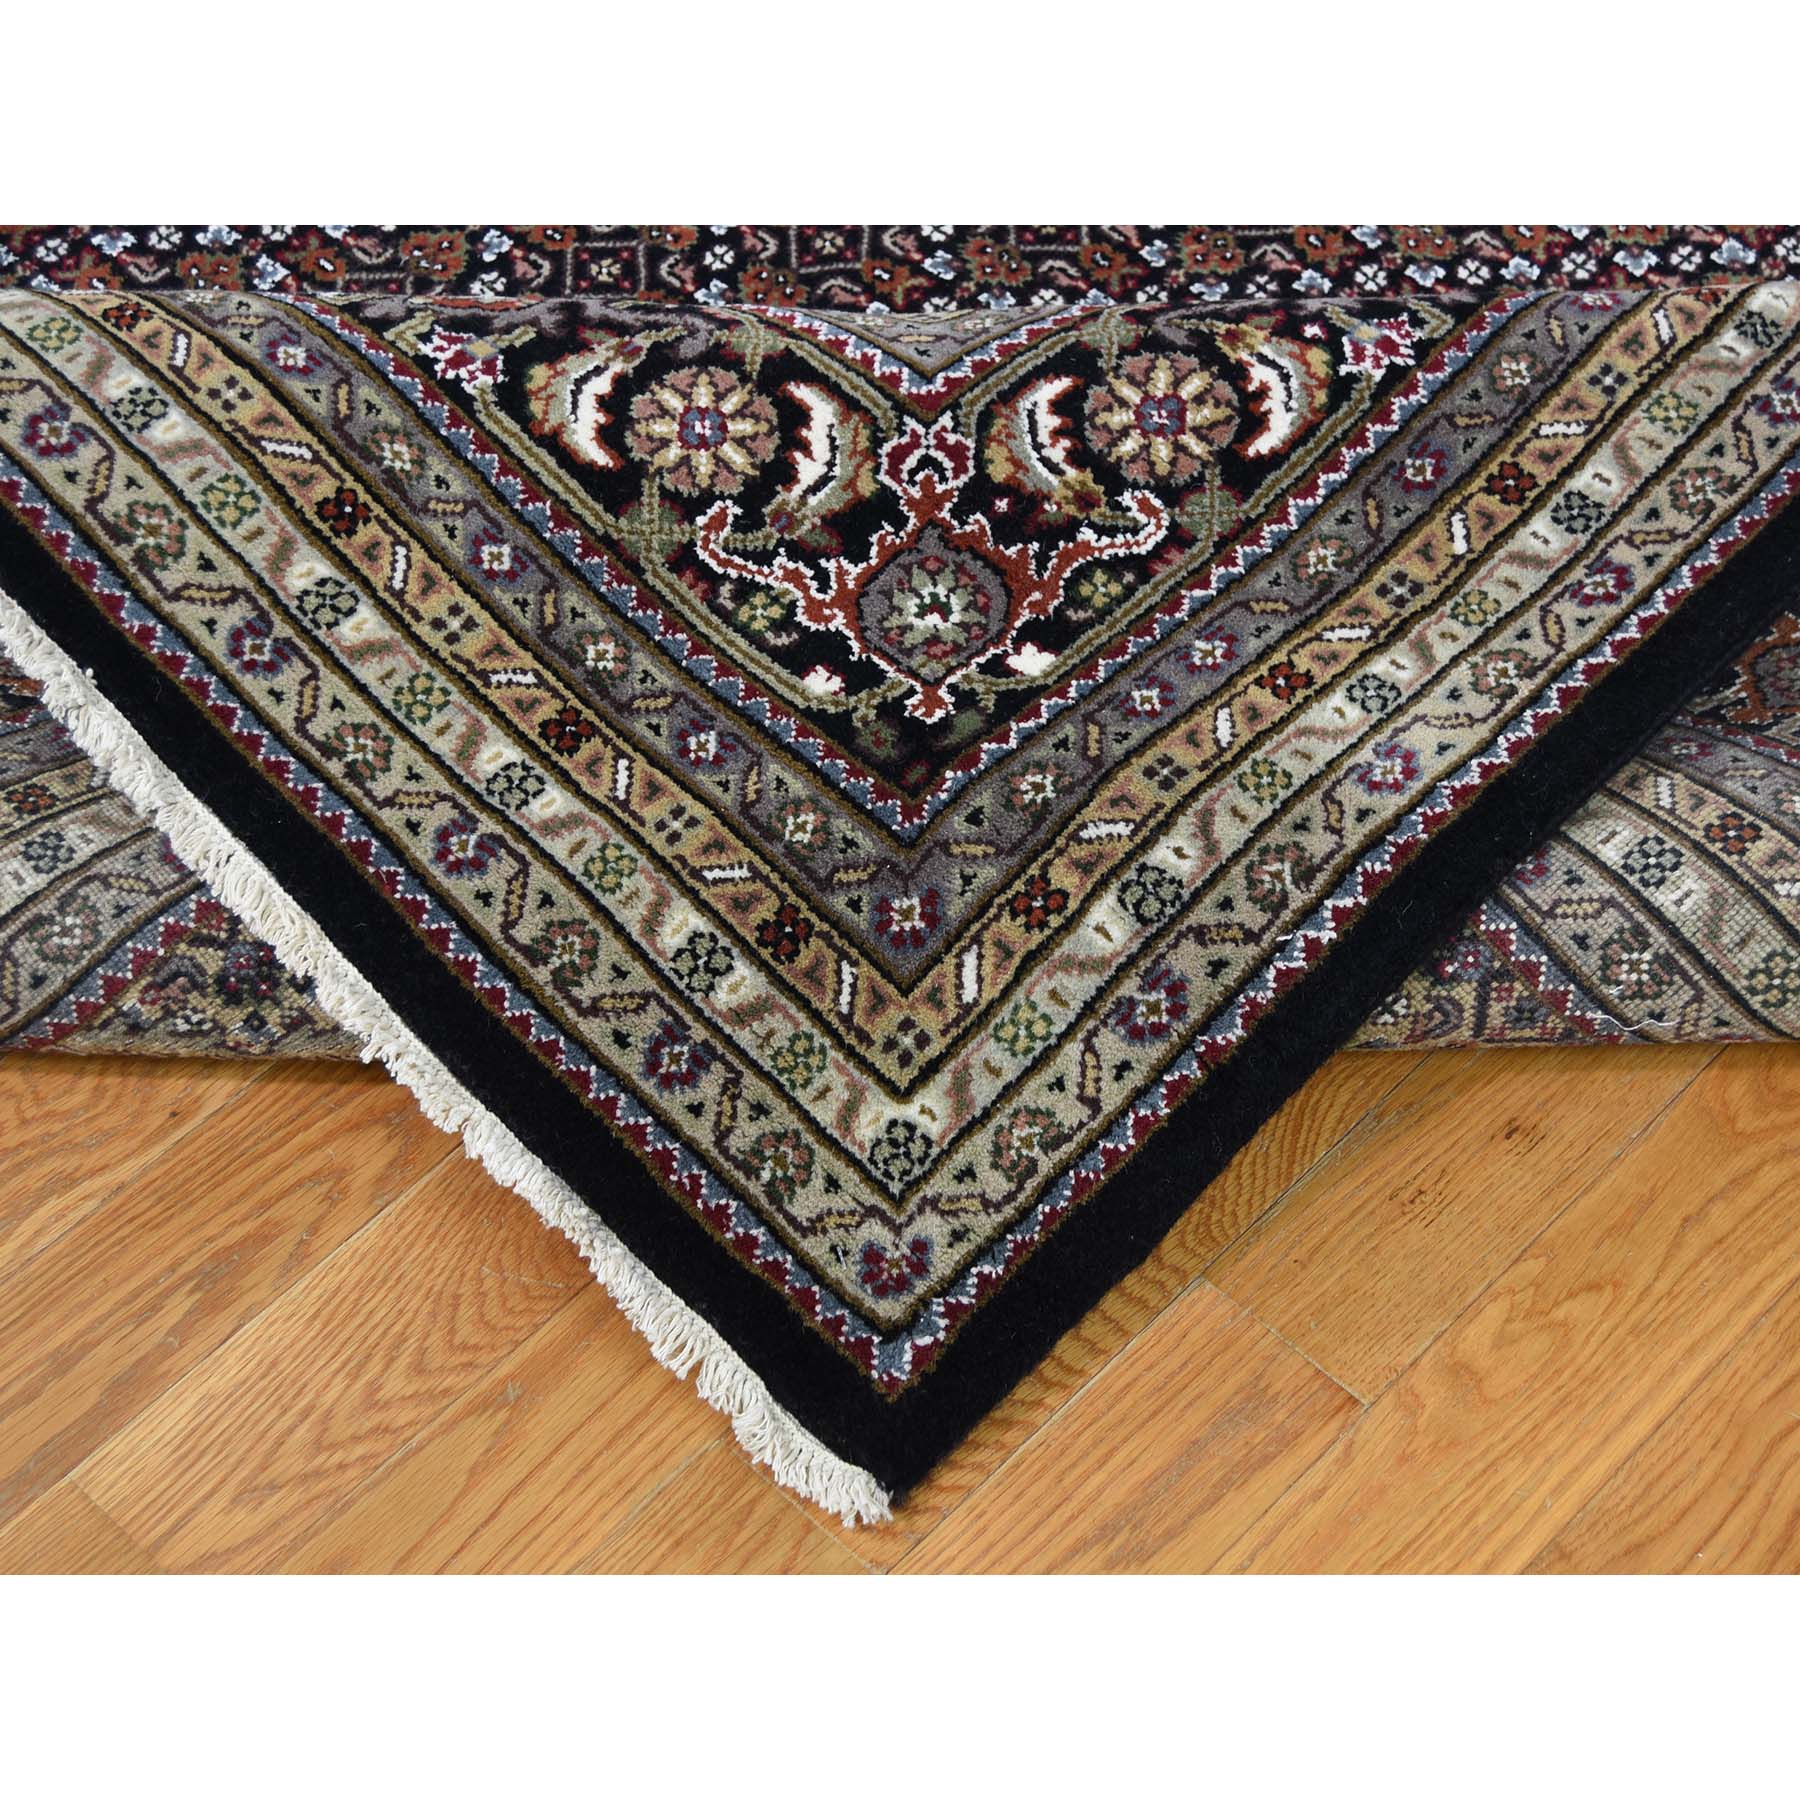 9-x18-2  Gallery Size Tabriz Mahi Design Wool and Silk Hand-Knotted Oriental Rug 